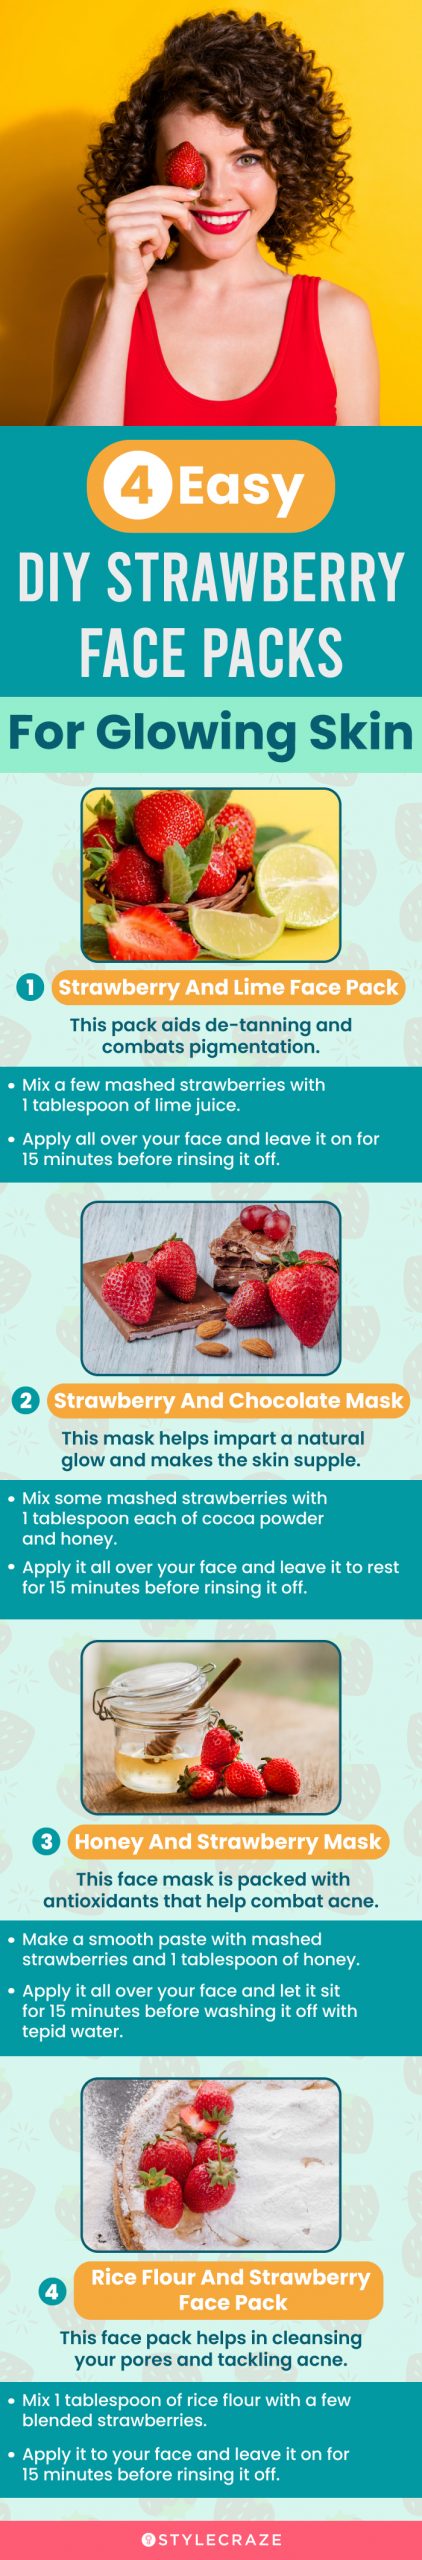 8 Strawberry Face Packs For Glowing Skin  